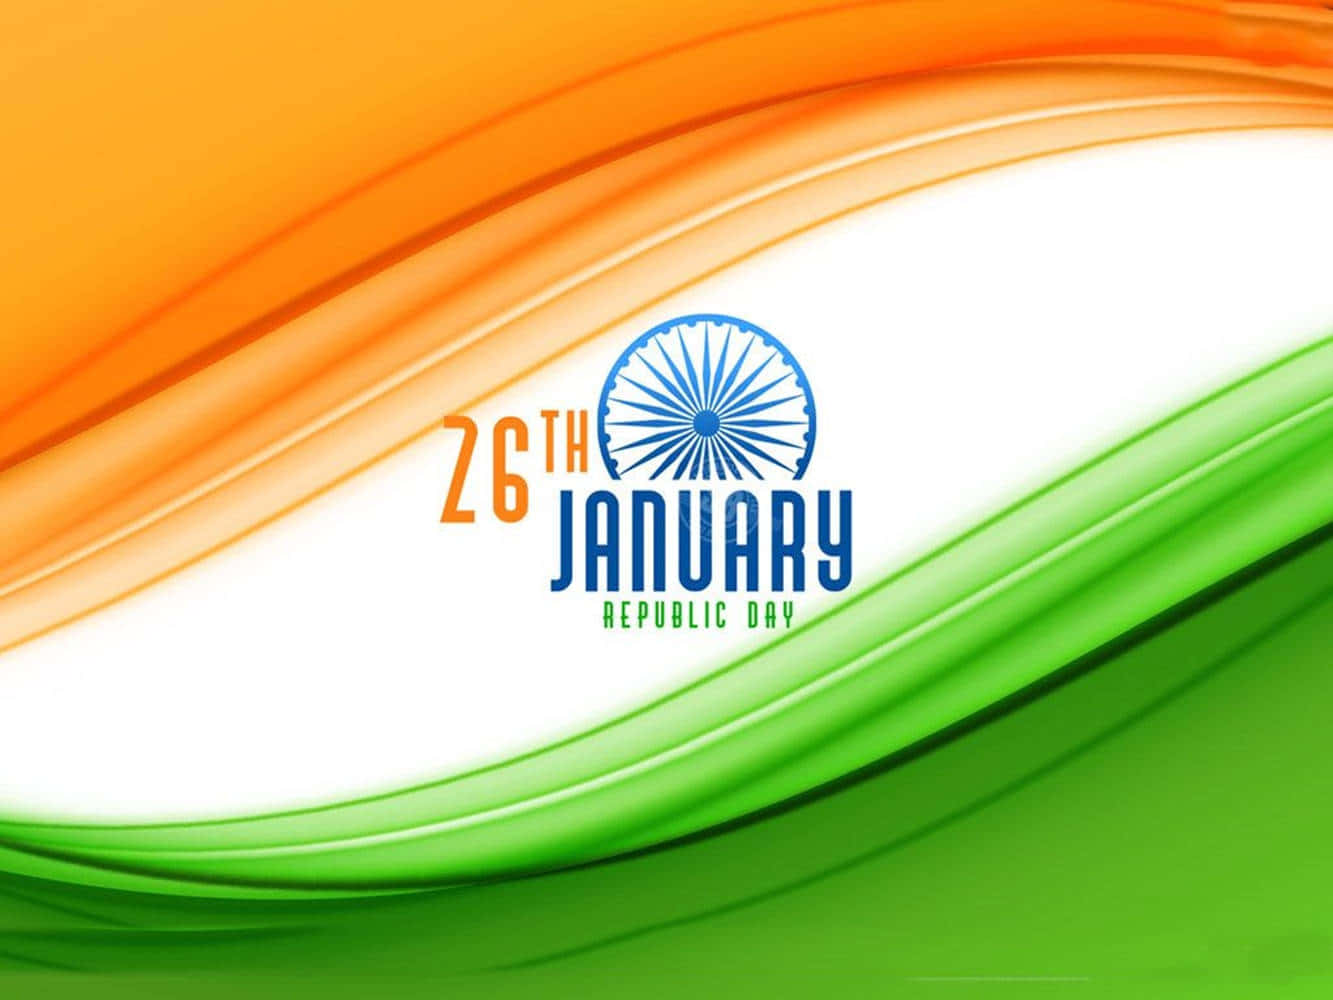 The Indian Flag With The Words January 25th